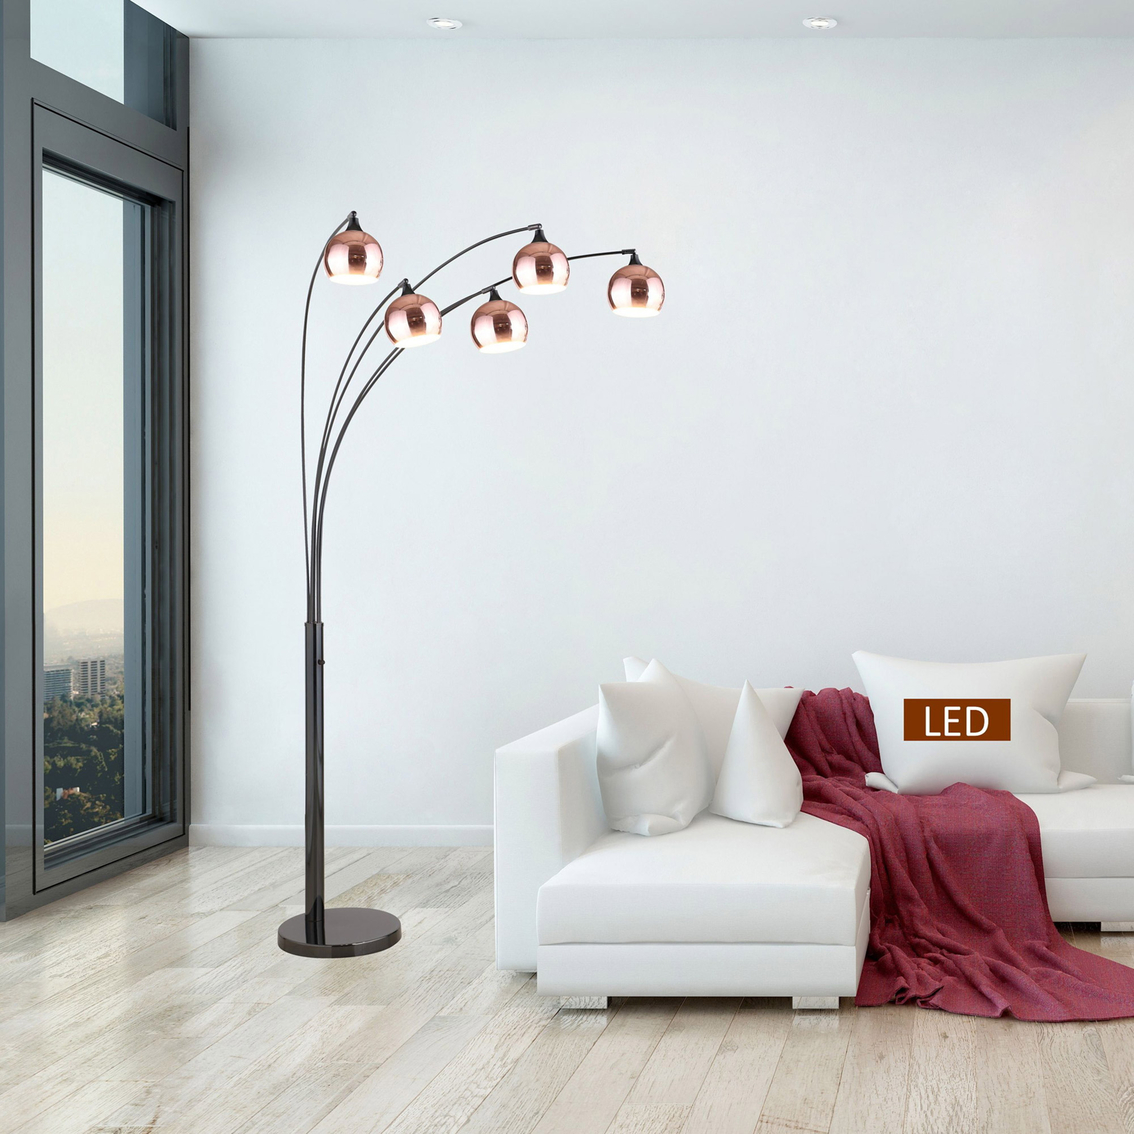 Artiva USA Amore 86 in. Two-Tone LED Floor Lamp with Dimmer - Image 2 of 2